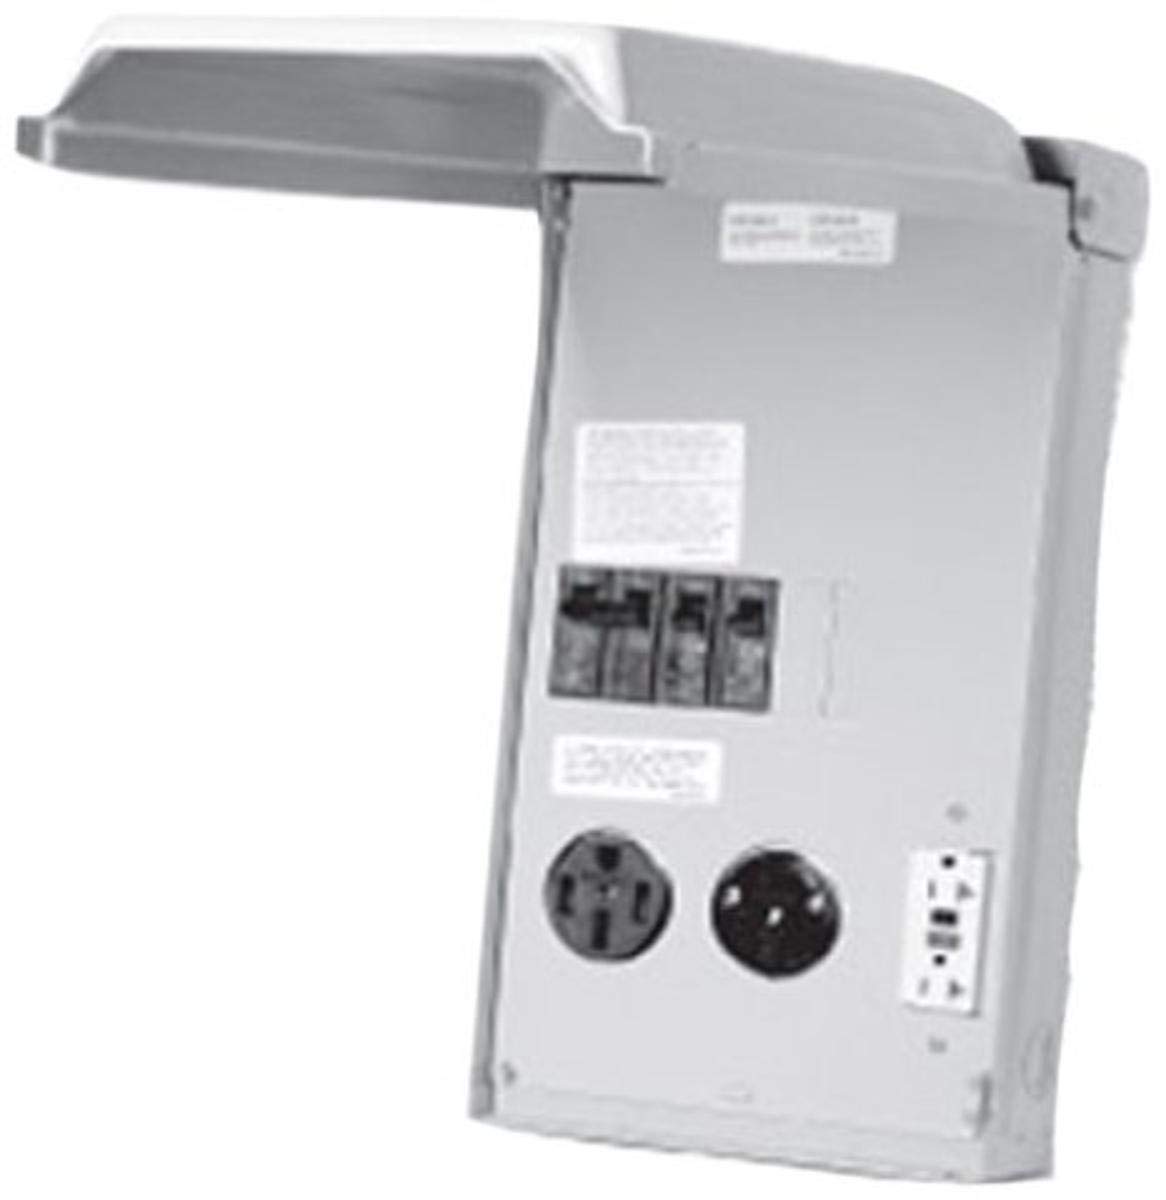 Midwest U075CTL010 100-Amp Outlet Box with GFCI